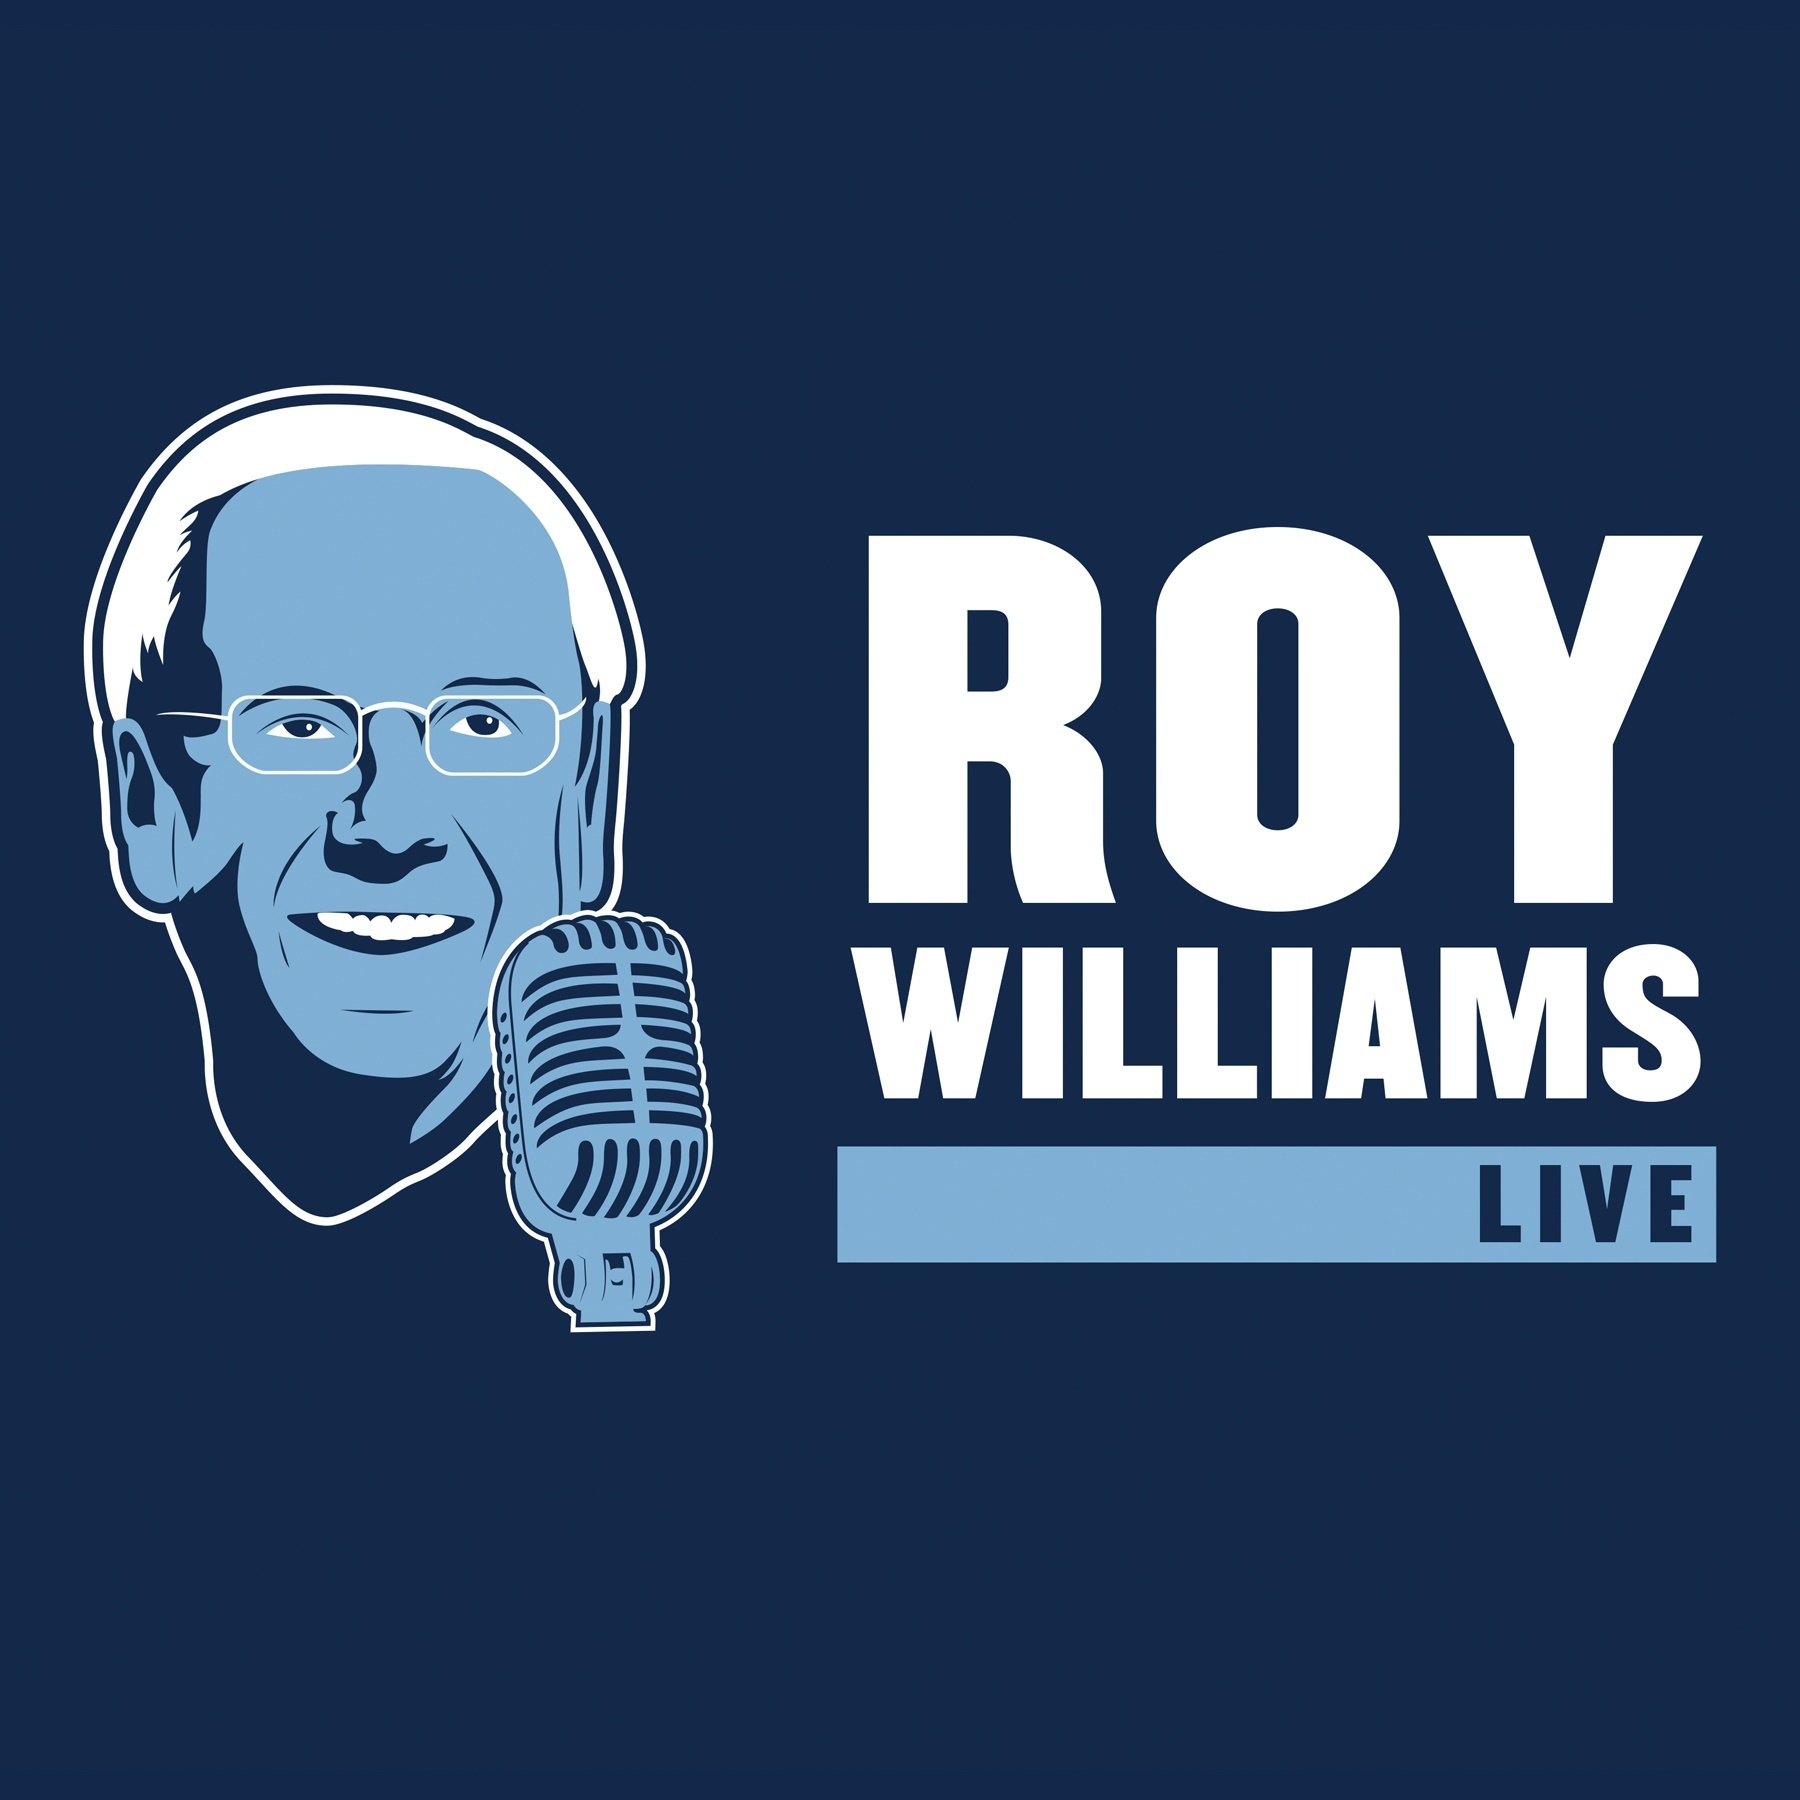 Roy Williams Live from 1-8-18